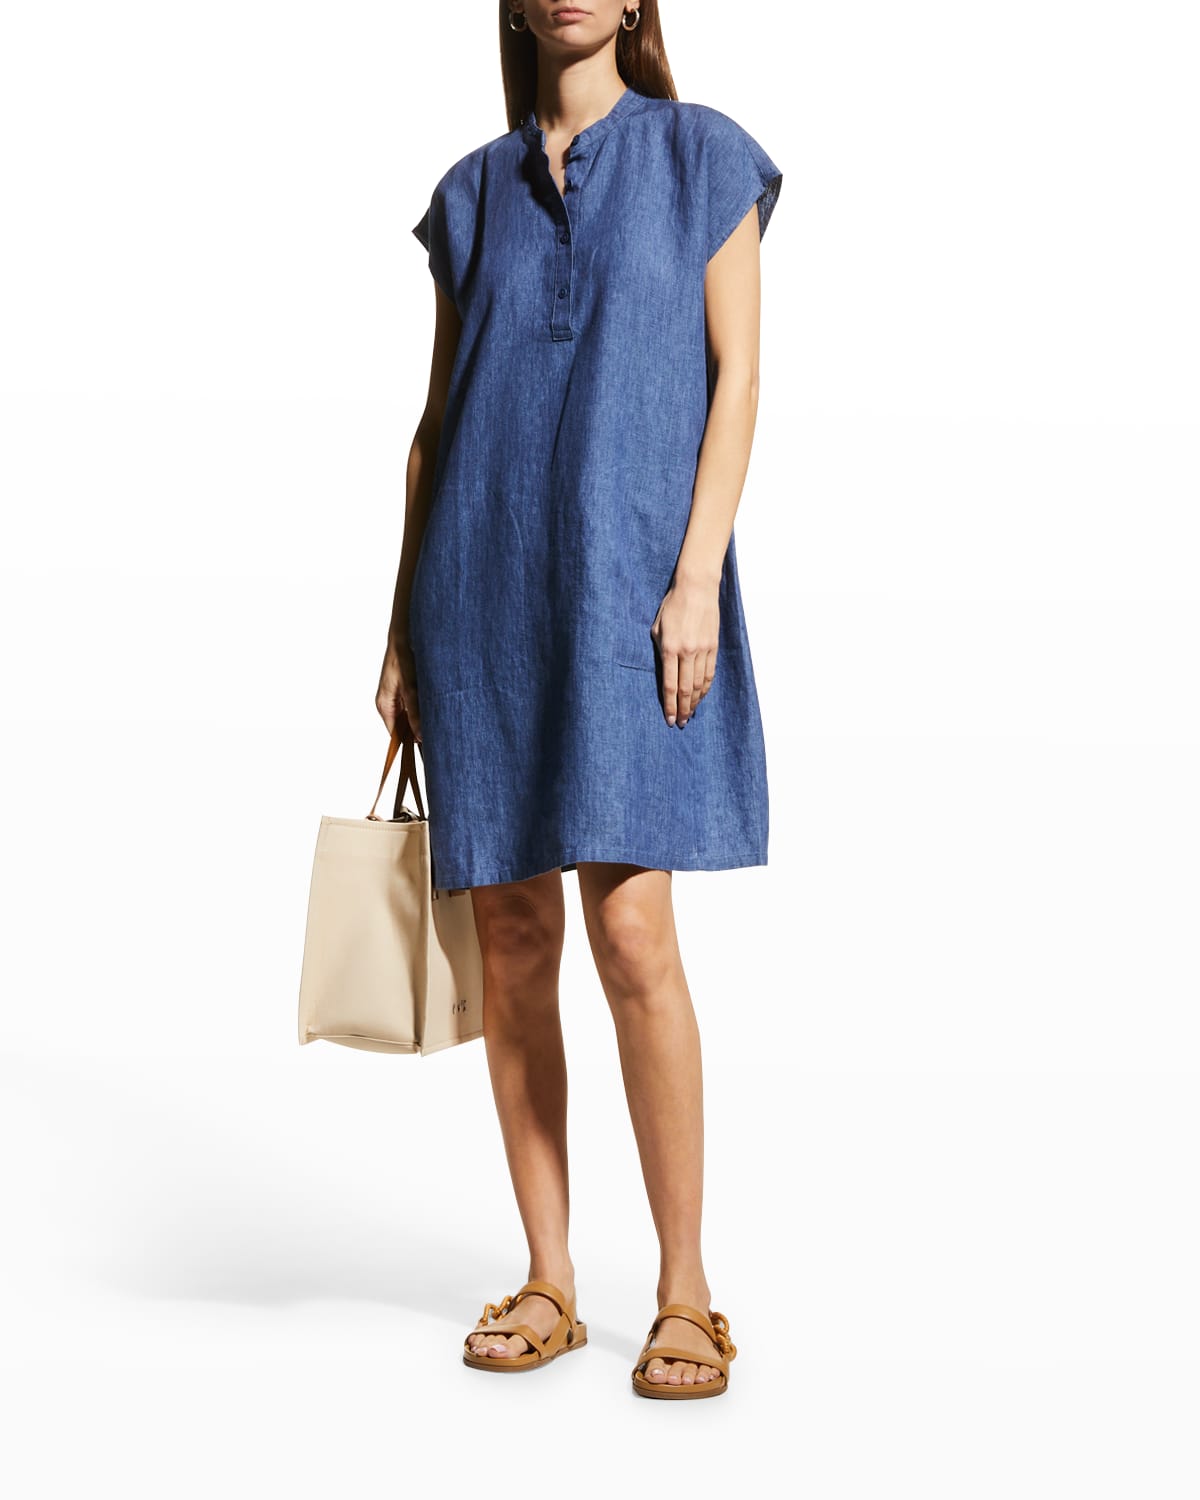 Eileen Fisher Washed Organic Linen Delave Shift Dress